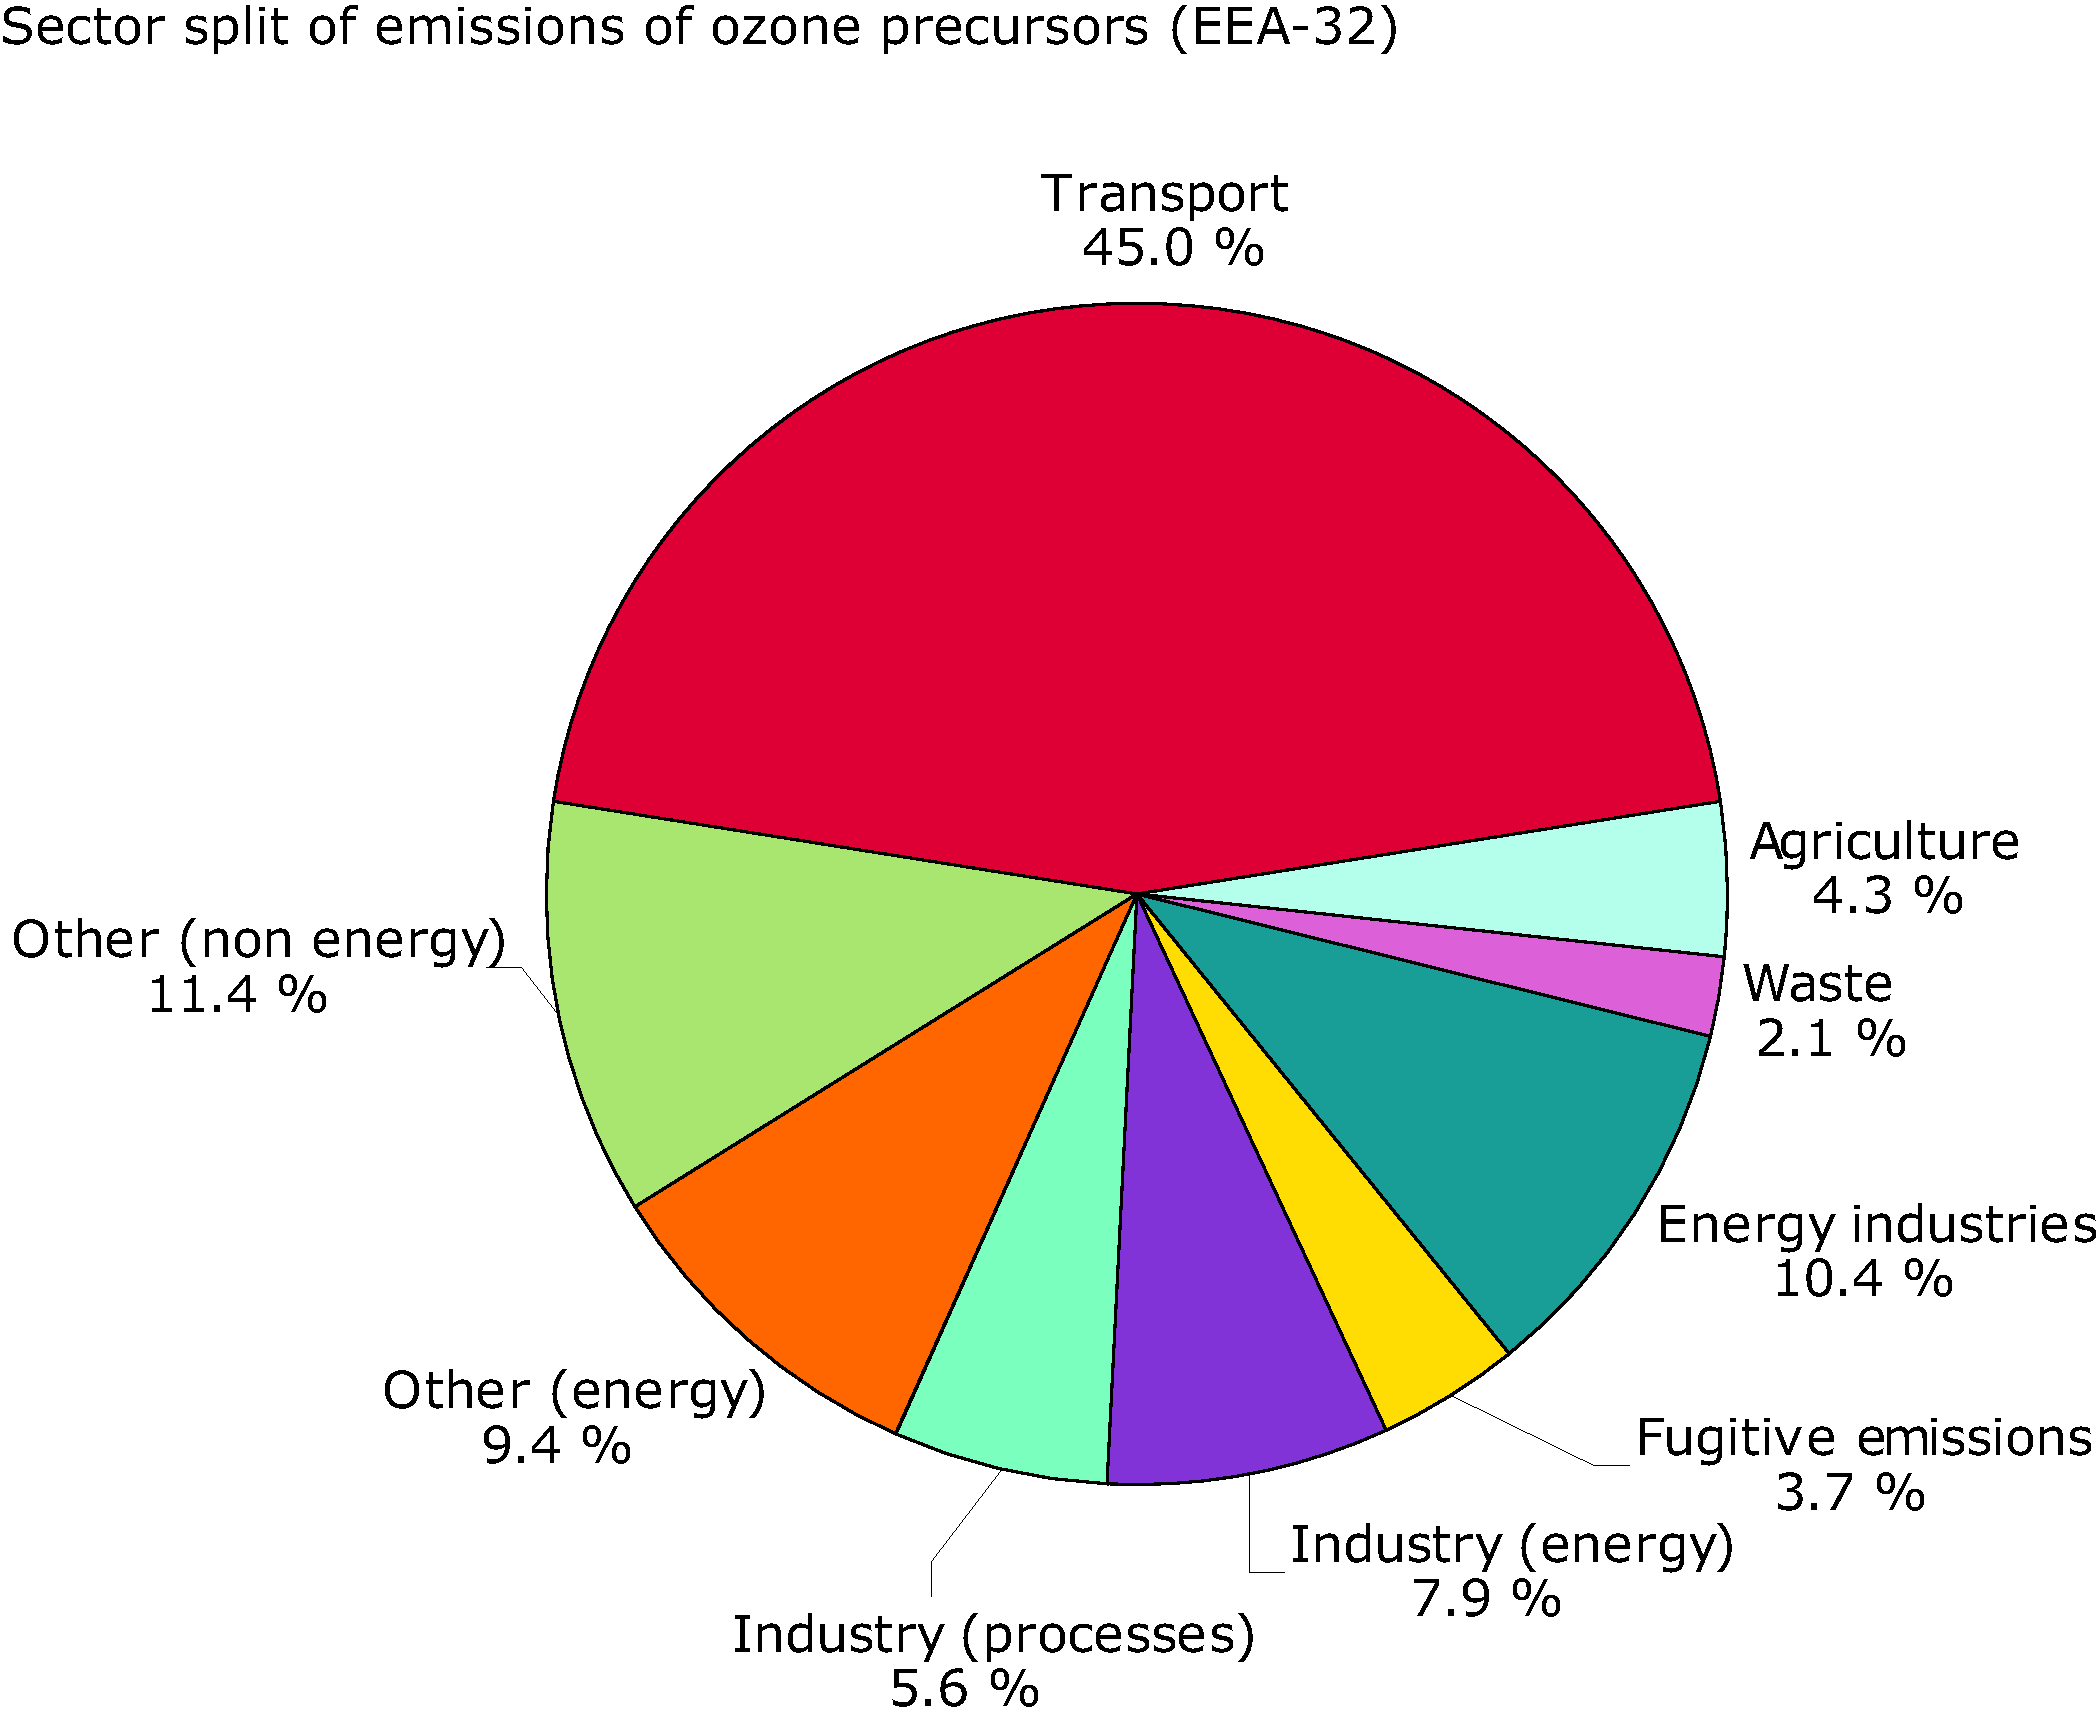 Sector split for emissions of ozone precursors (EEA member countries), 2002